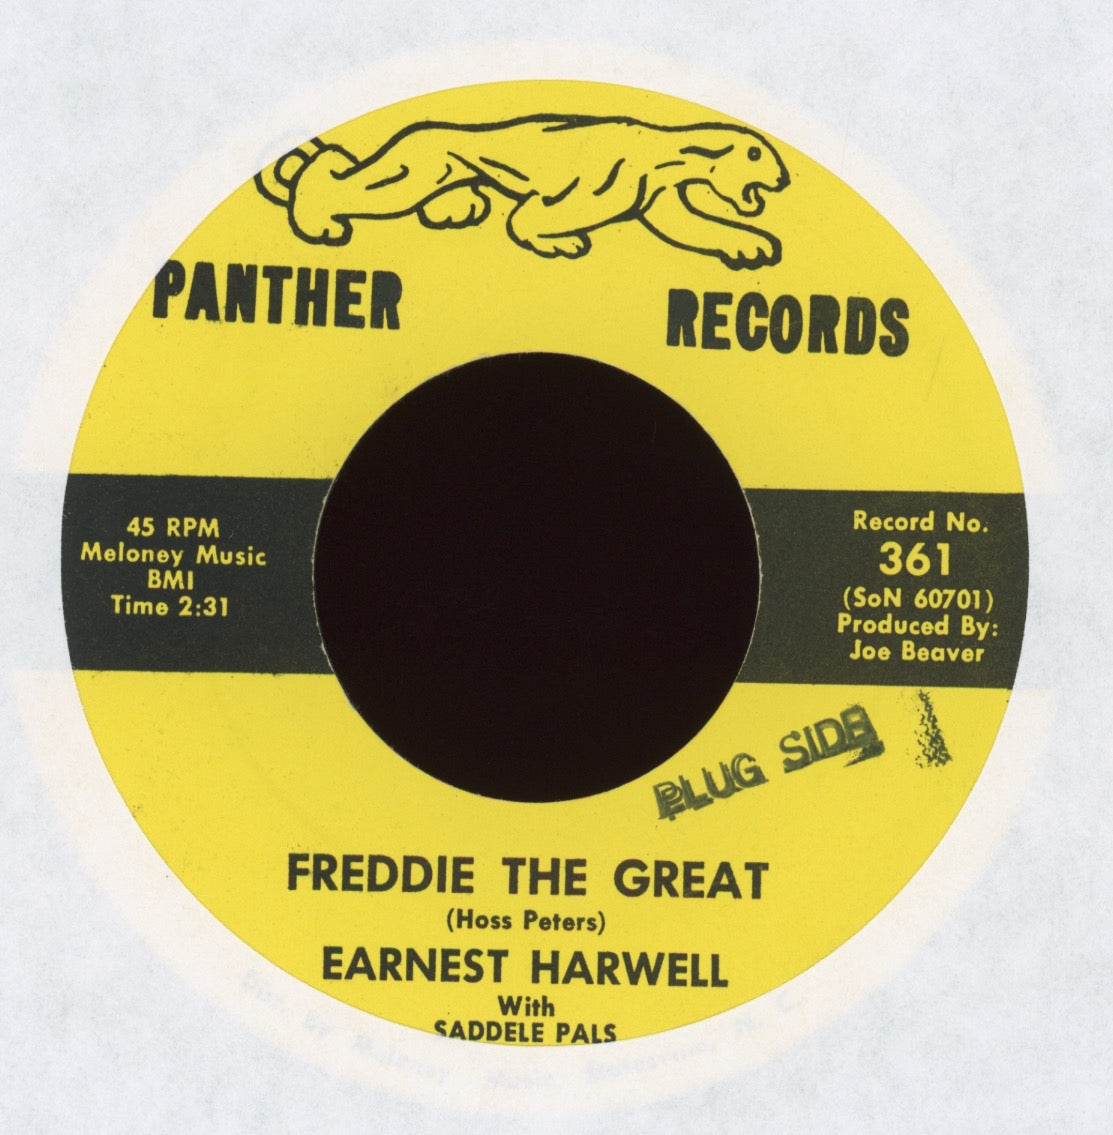 Earnest Harwell - Freddie The Great on Panther